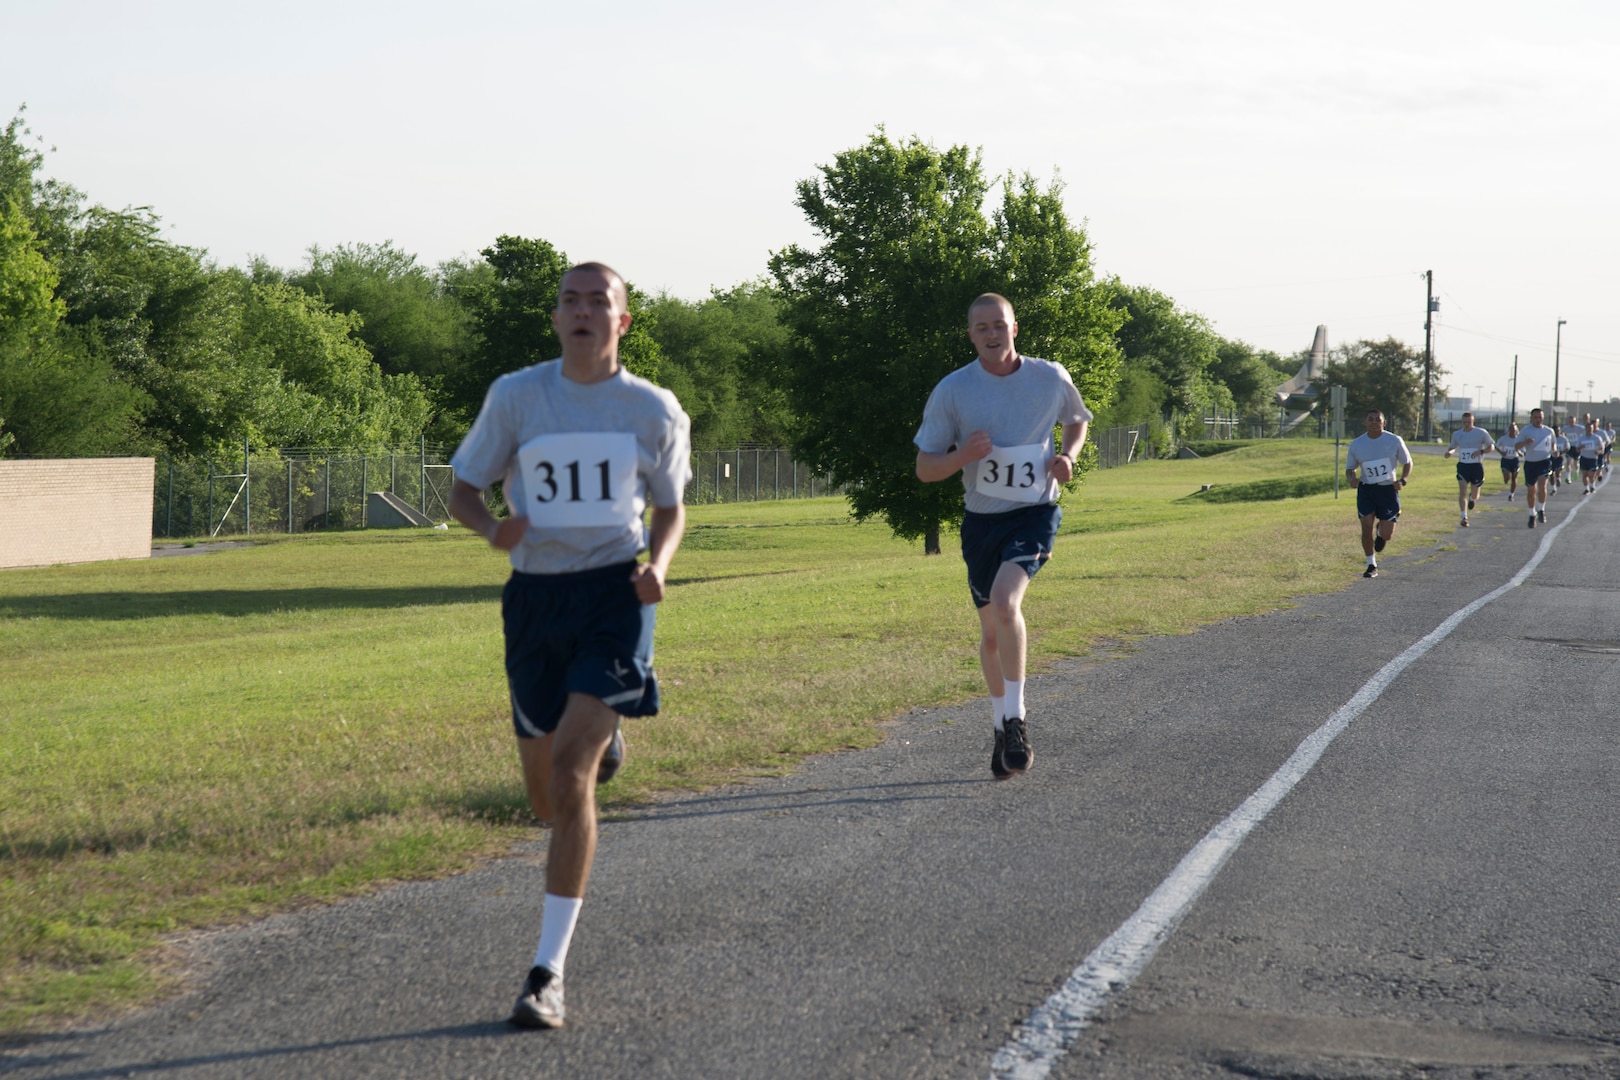 Air Force Basic Military trainees compete for first place during the 324th Training Squadron’s first 5K Run event at Joint Base San Antonio-Lackland, Texas, March 25, 2017. The 5K was held to increase morale amongst the trainees staff and honor March 24th as Knight’s Day, a day 324th TRS commander Lt. Col. Sammuel Berenguer designated to honor the legacy and lineage of the squadron. 